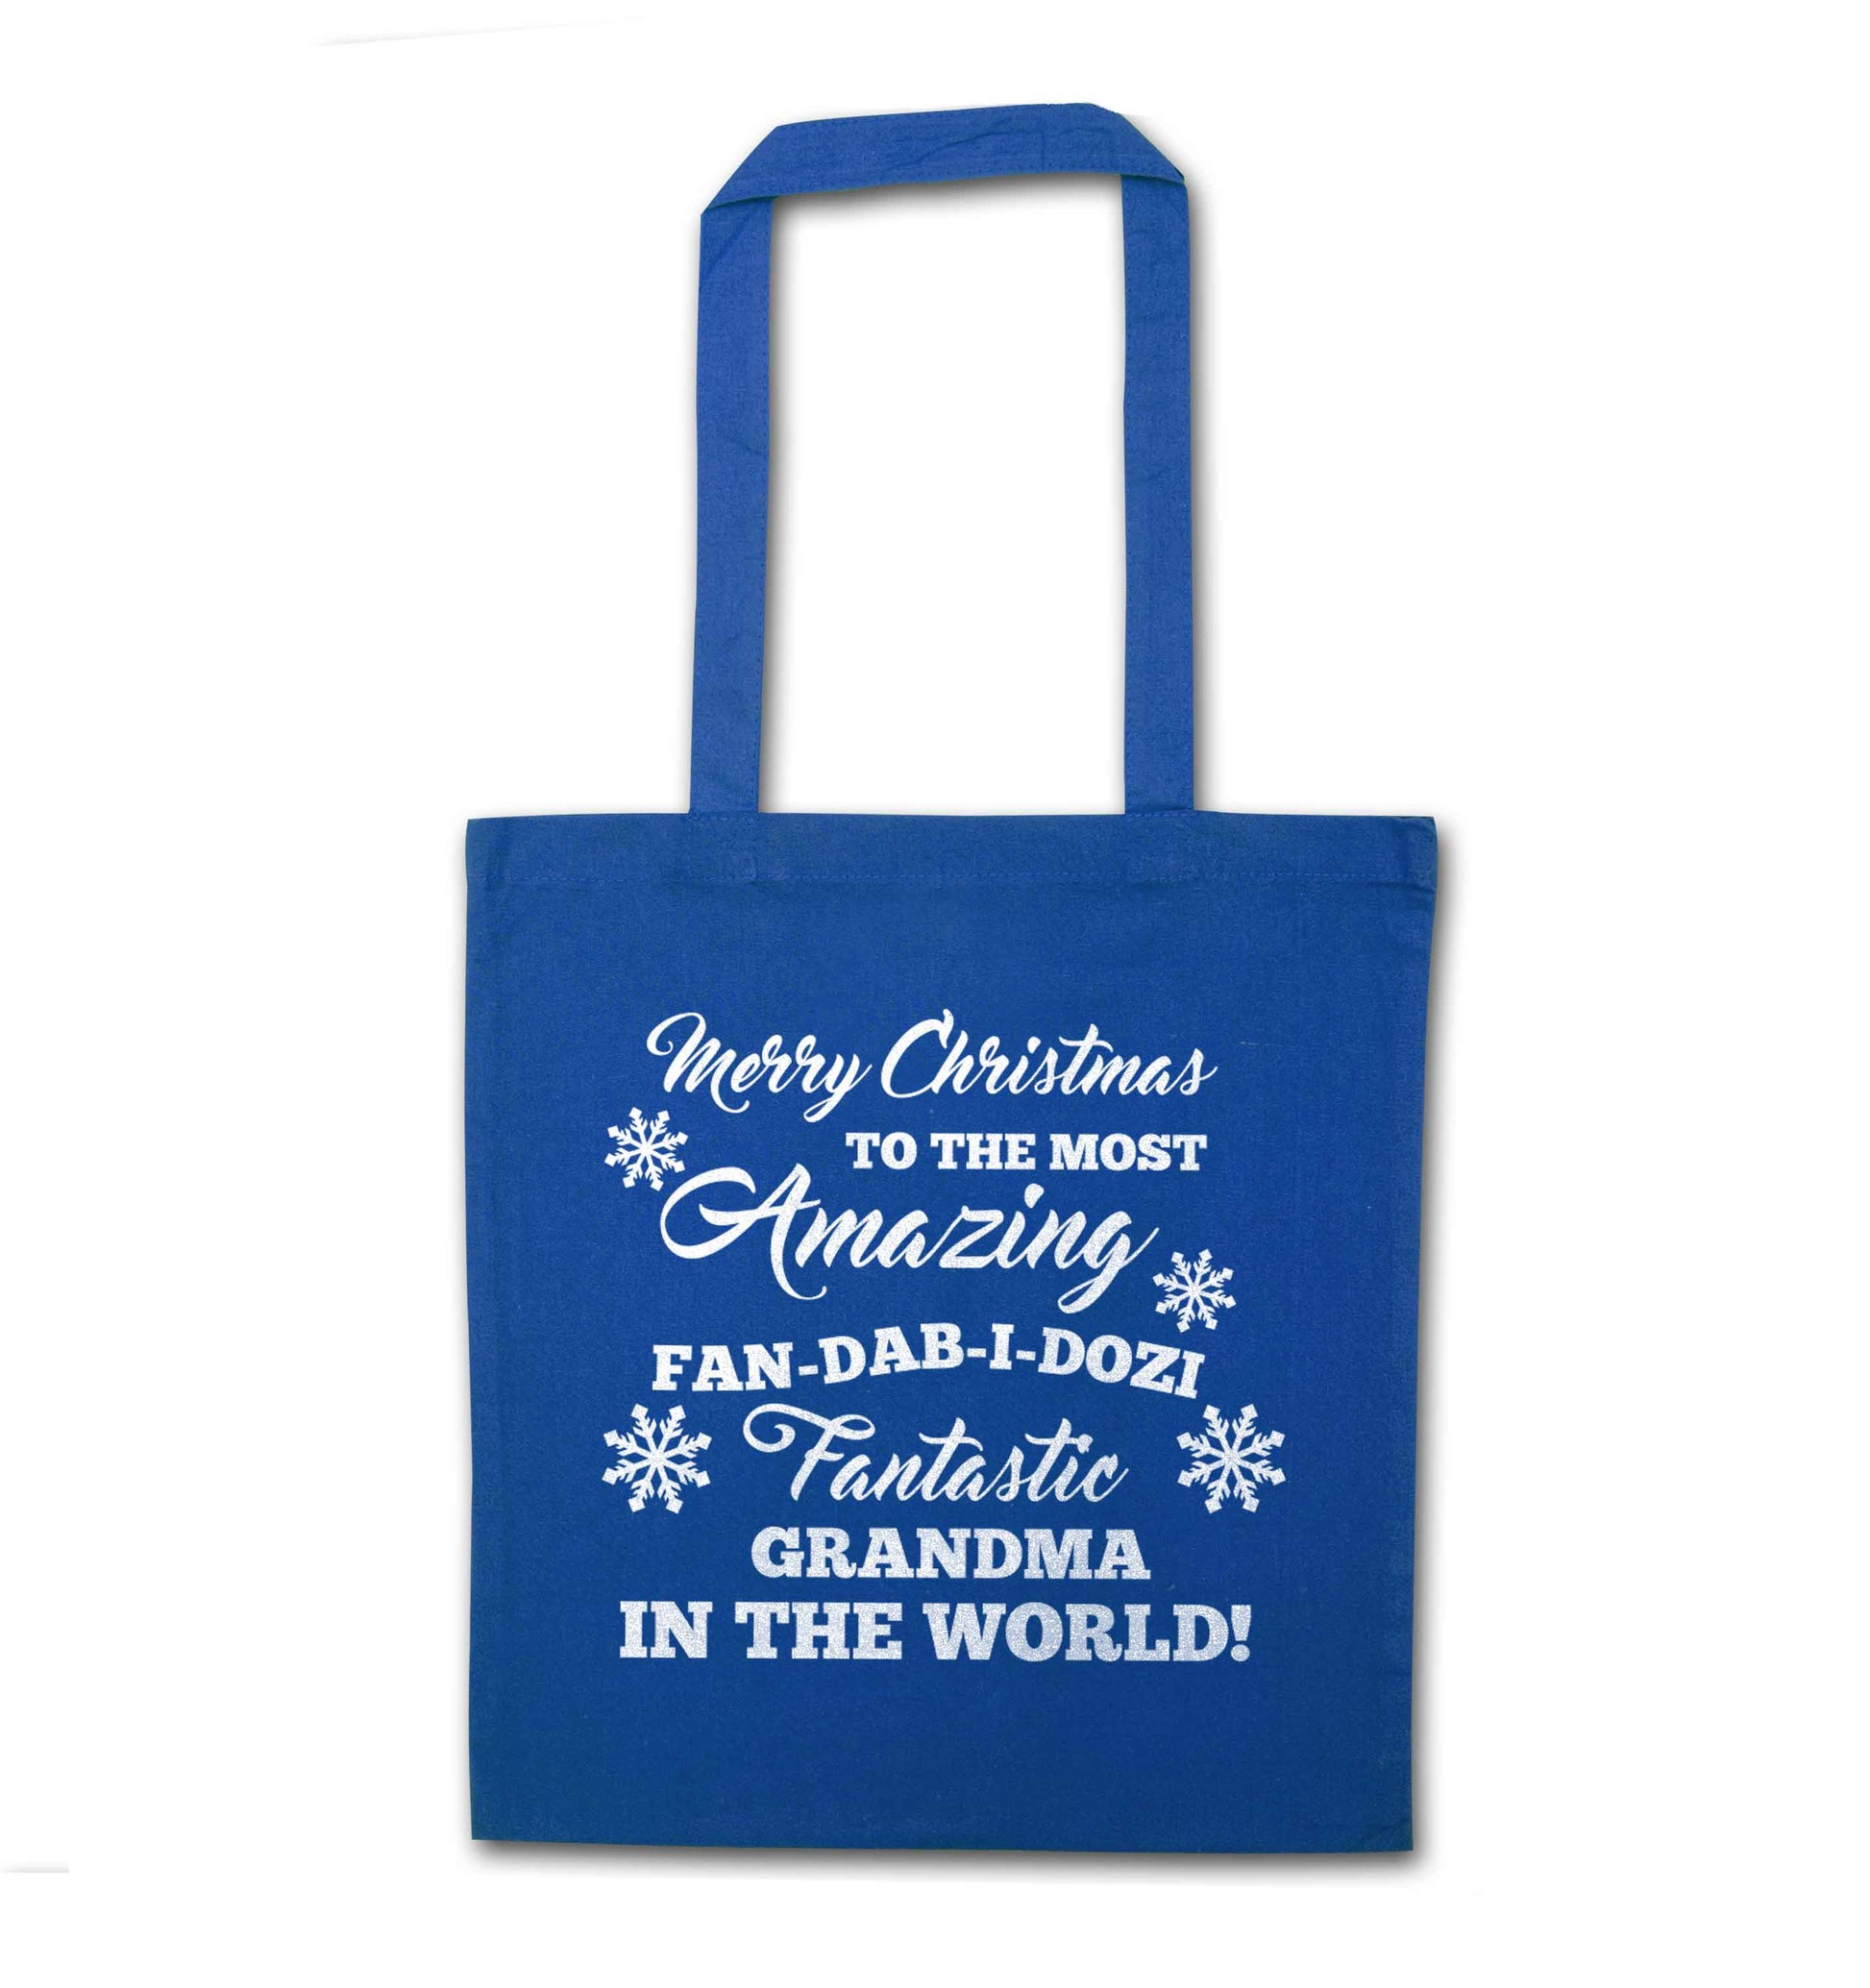 Merry Christmas to the most amazing fan-dab-i-dozi fantasic Grandma in the world blue tote bag